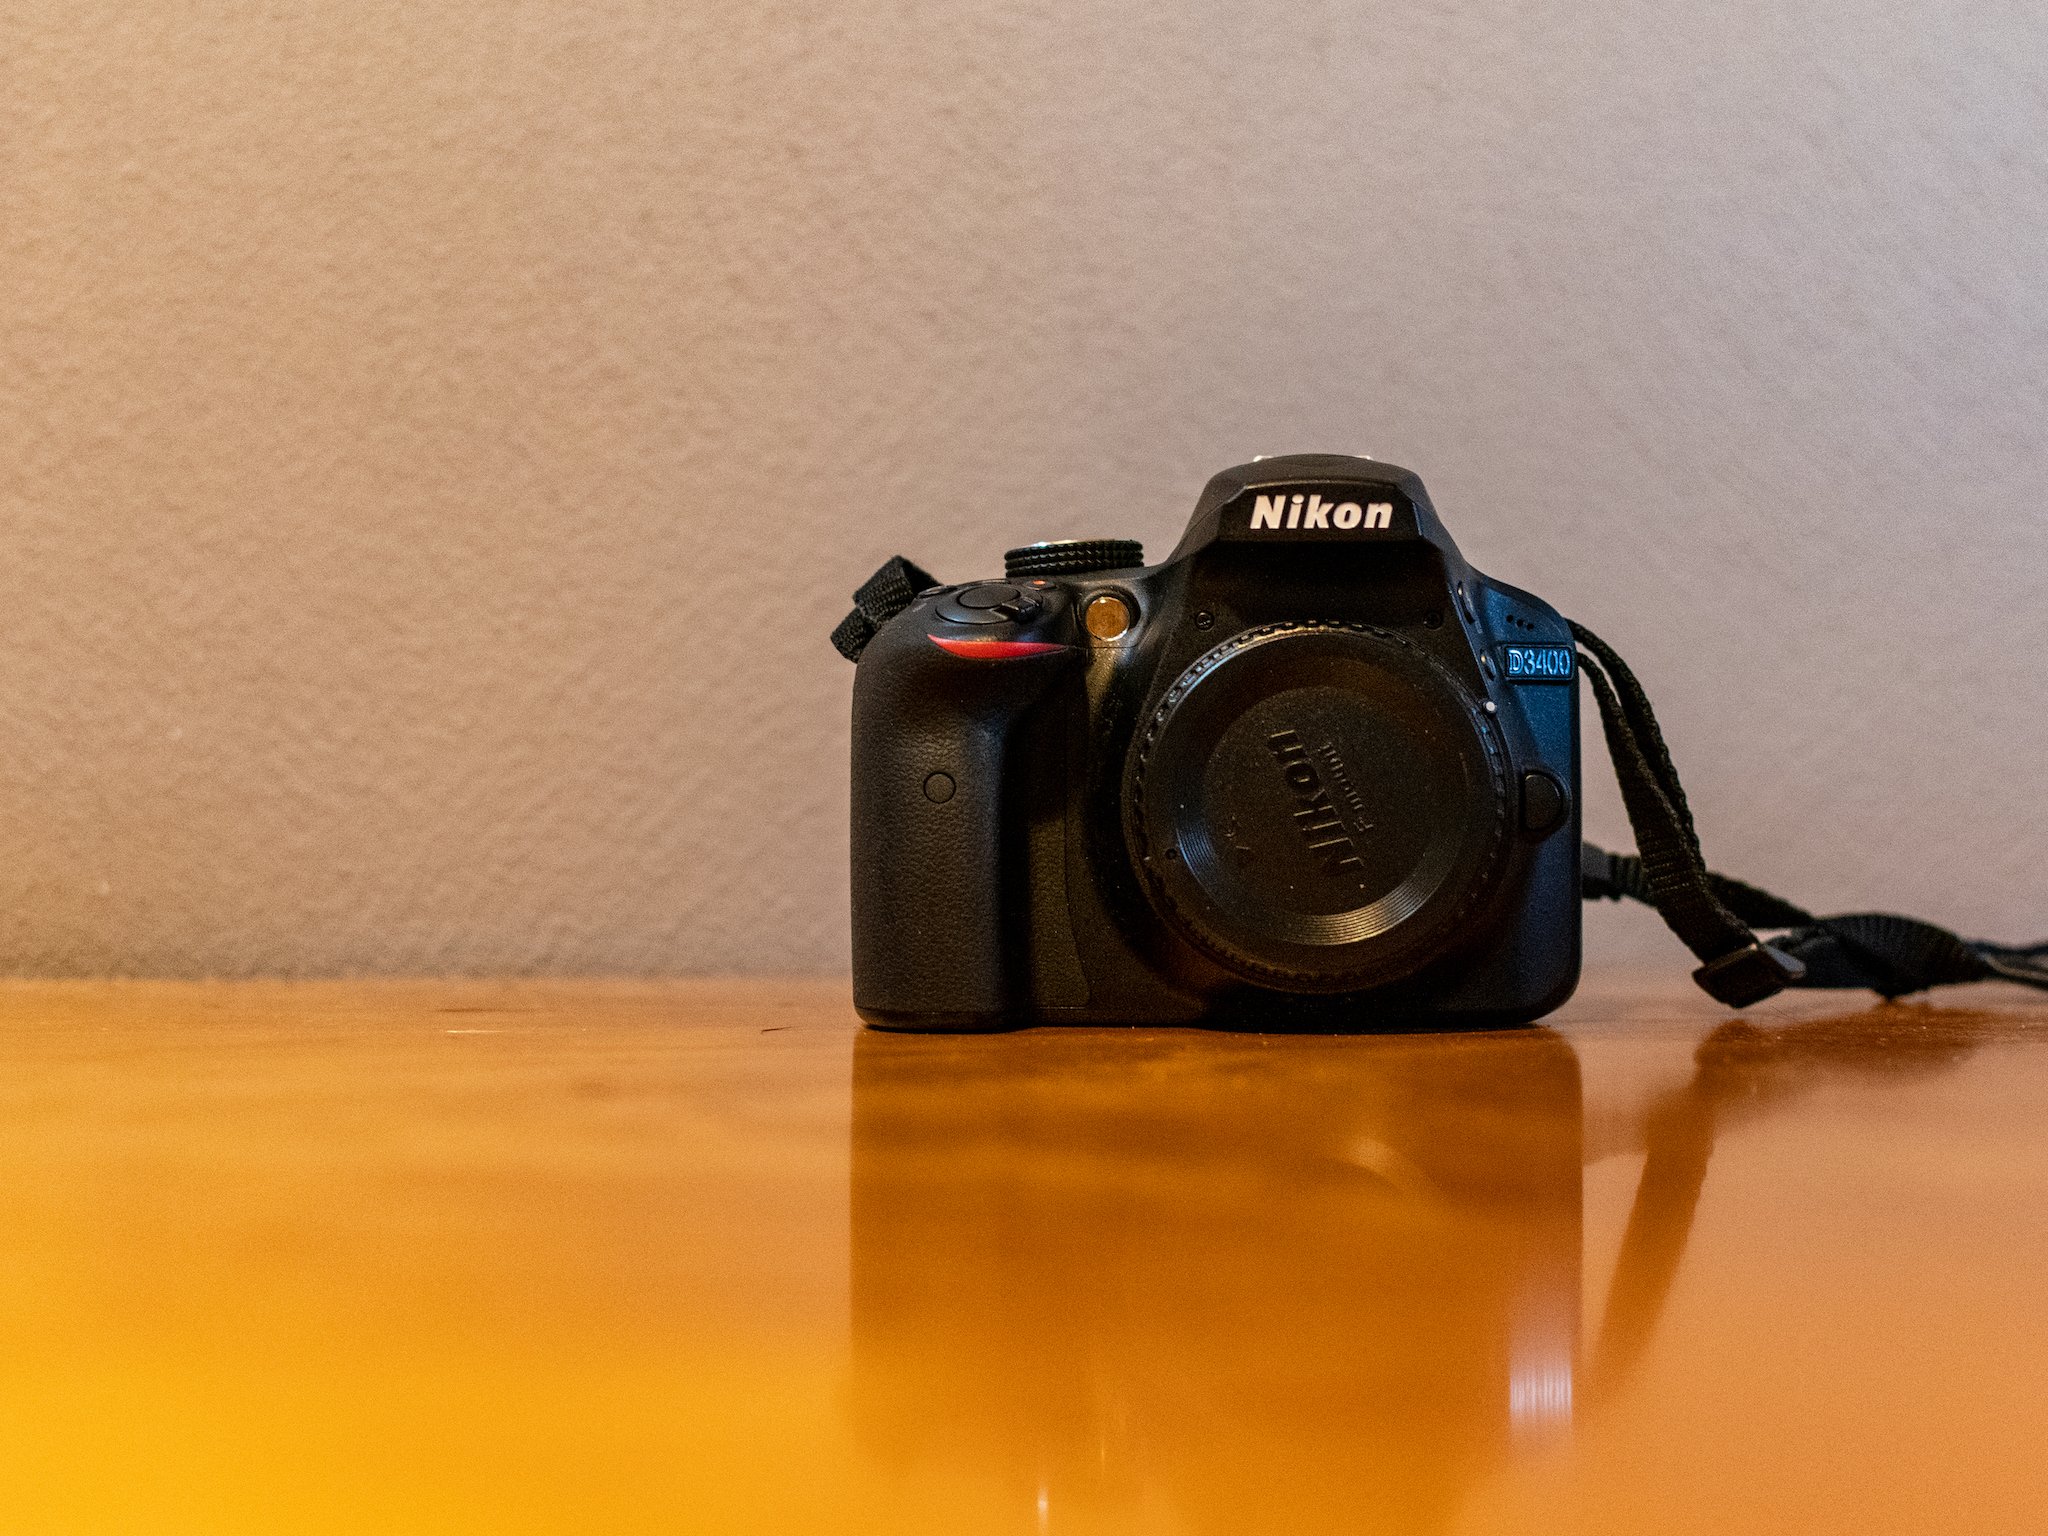 What lenses are compatible with the Nikon D3400?